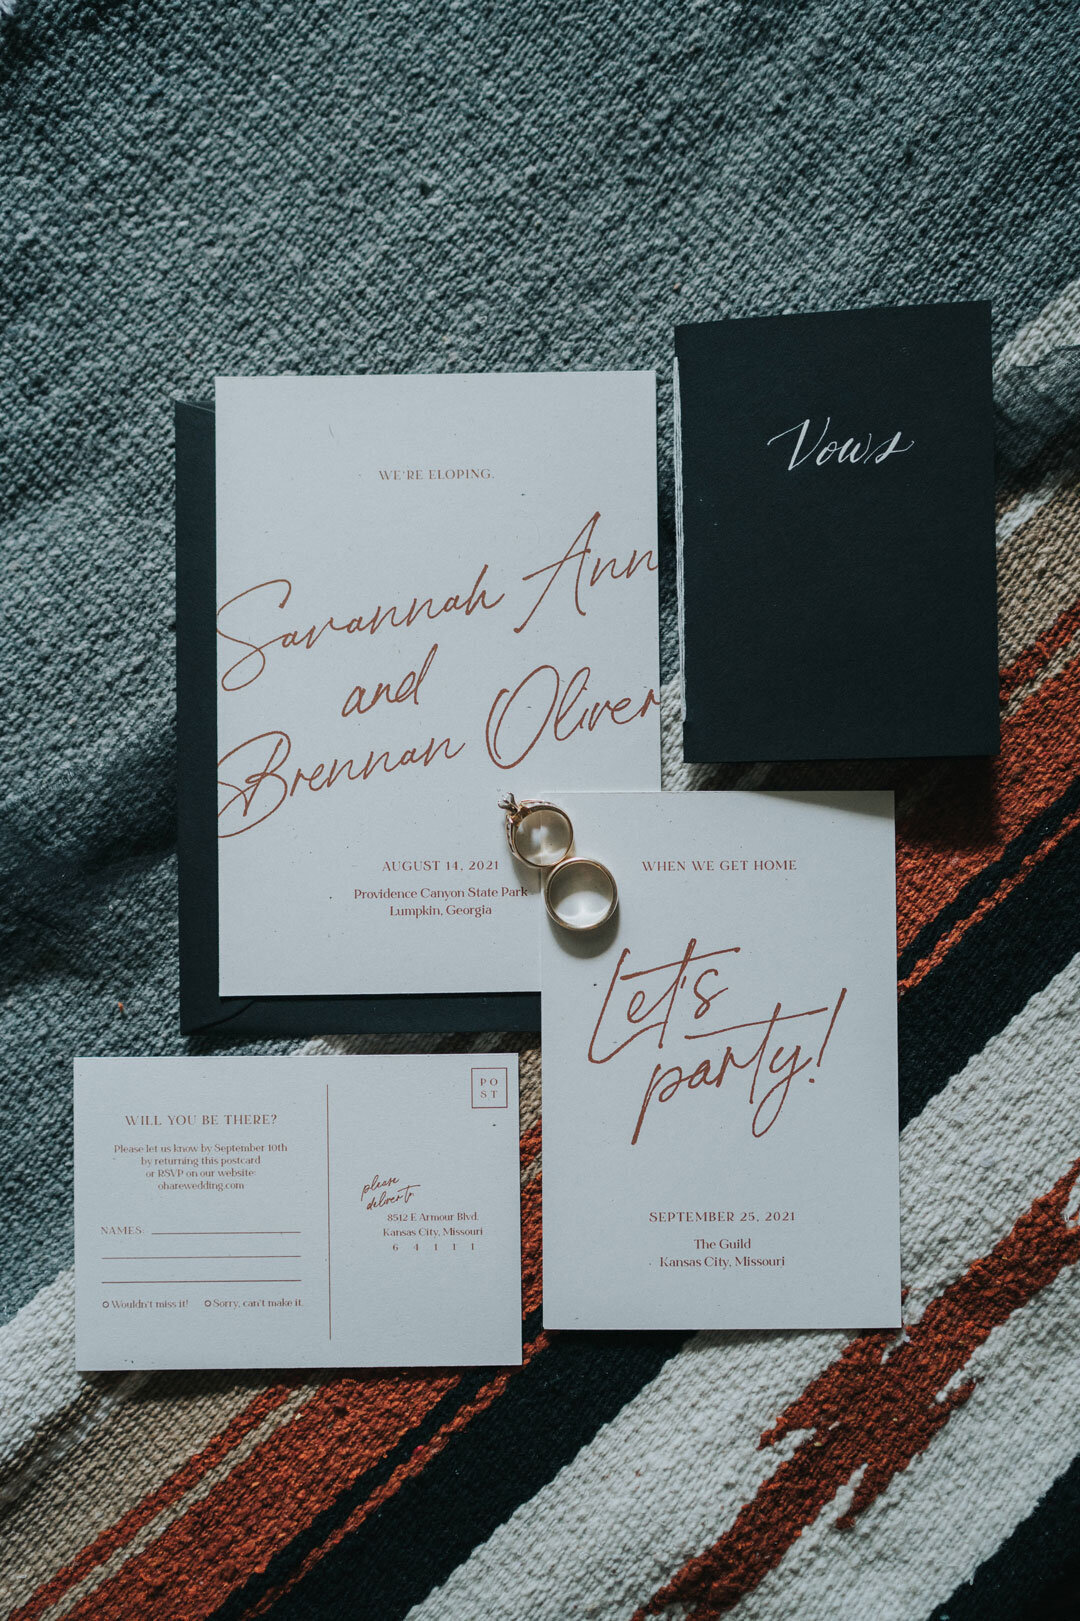 White wedding invitation with red script next to rings and black vow book